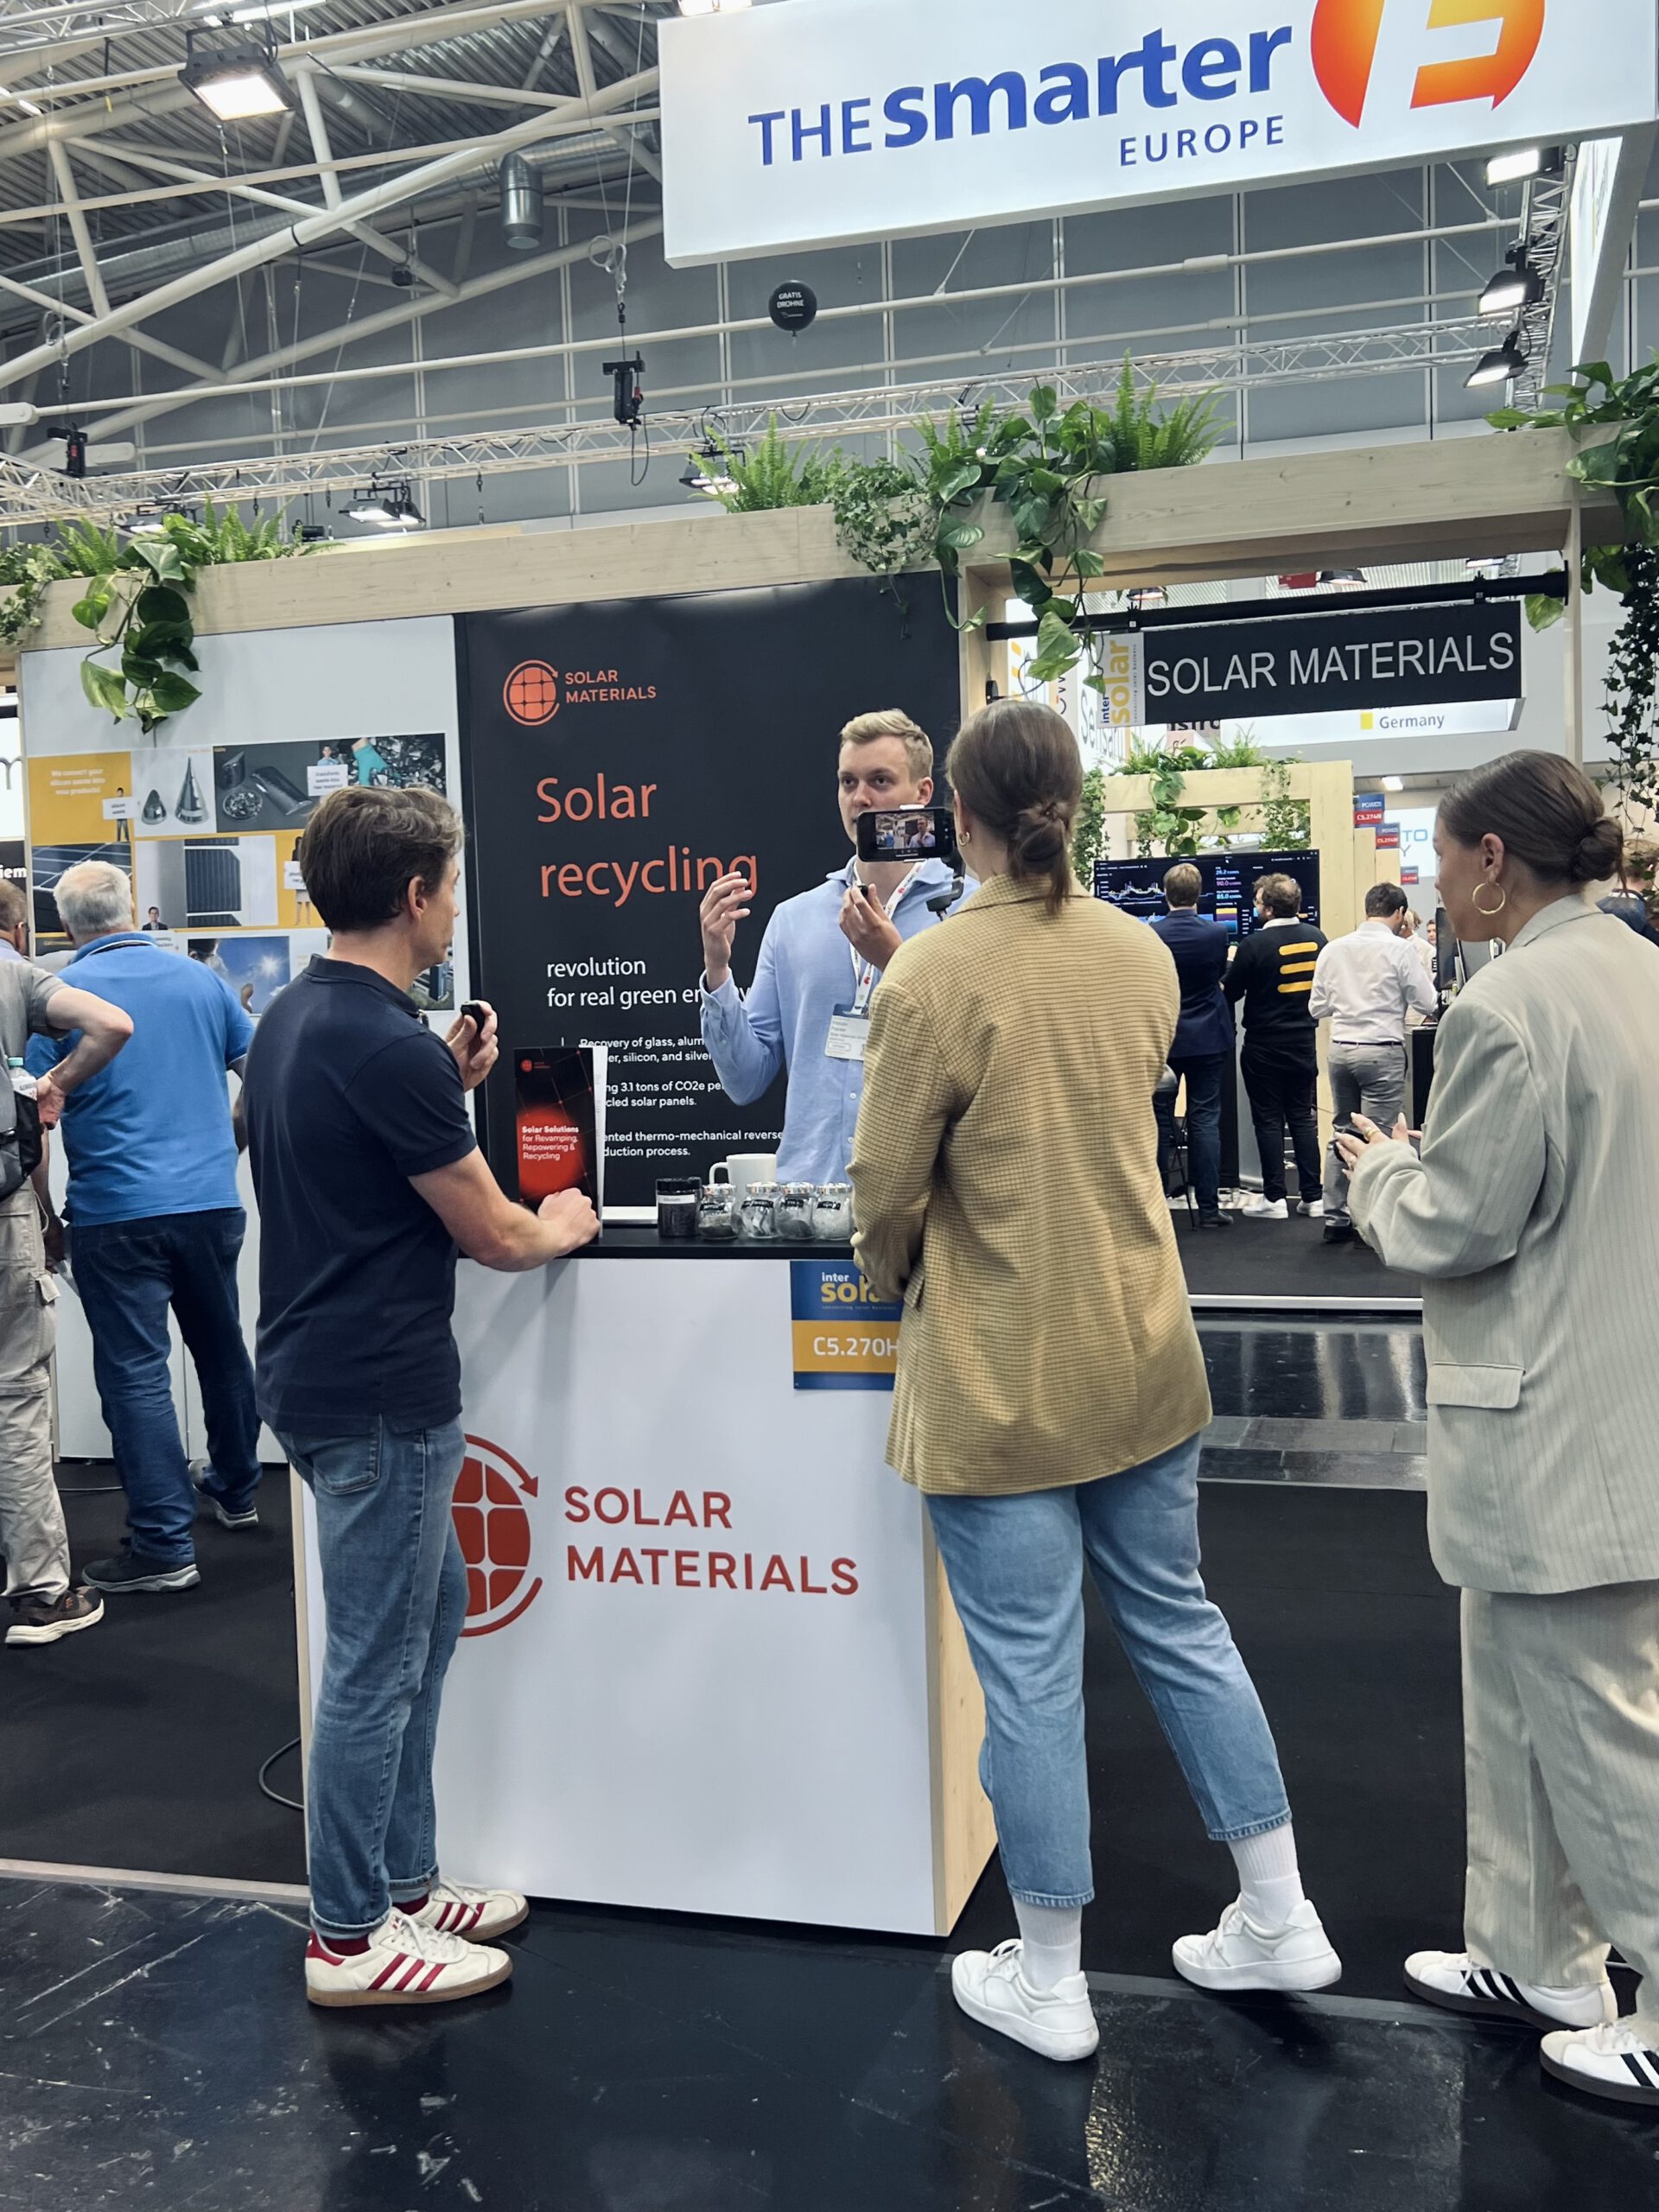 SOLAR MATERIALS was part of the Start booth at Intersolar 2024 in Munich